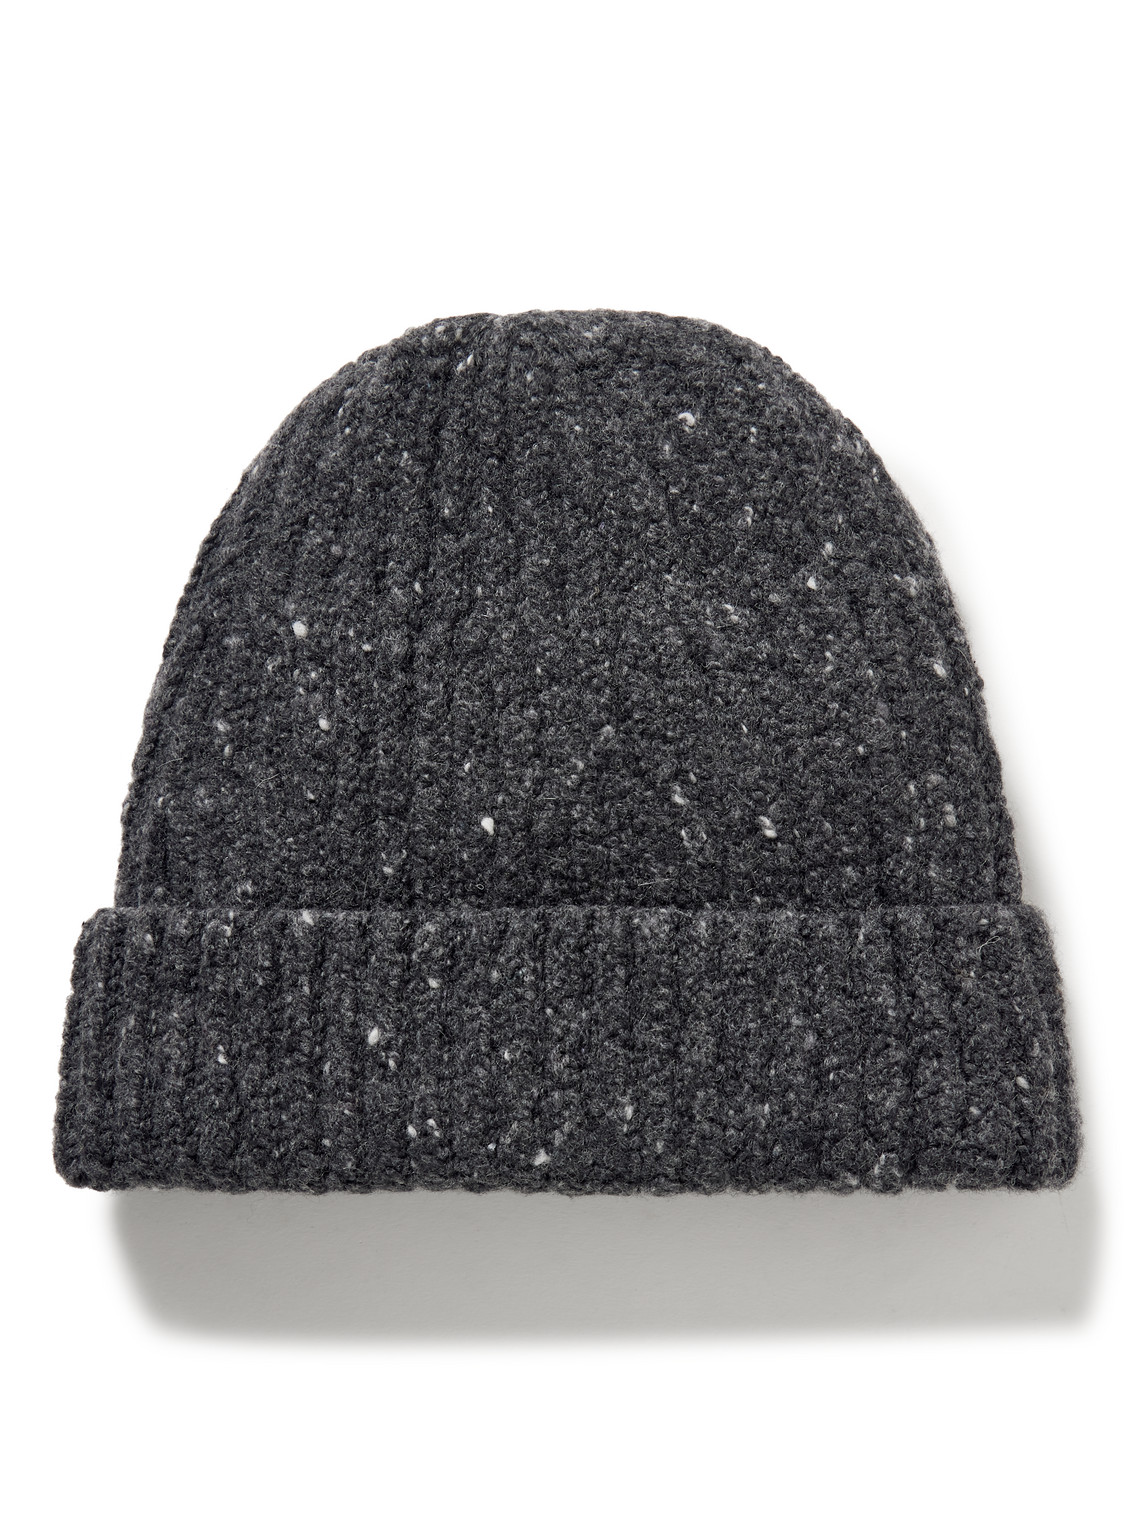 Inis Meáin - Ribbed Donegal Merino Wool and Cashmere-Blend Beanie - Men - Gray von Inis Meáin